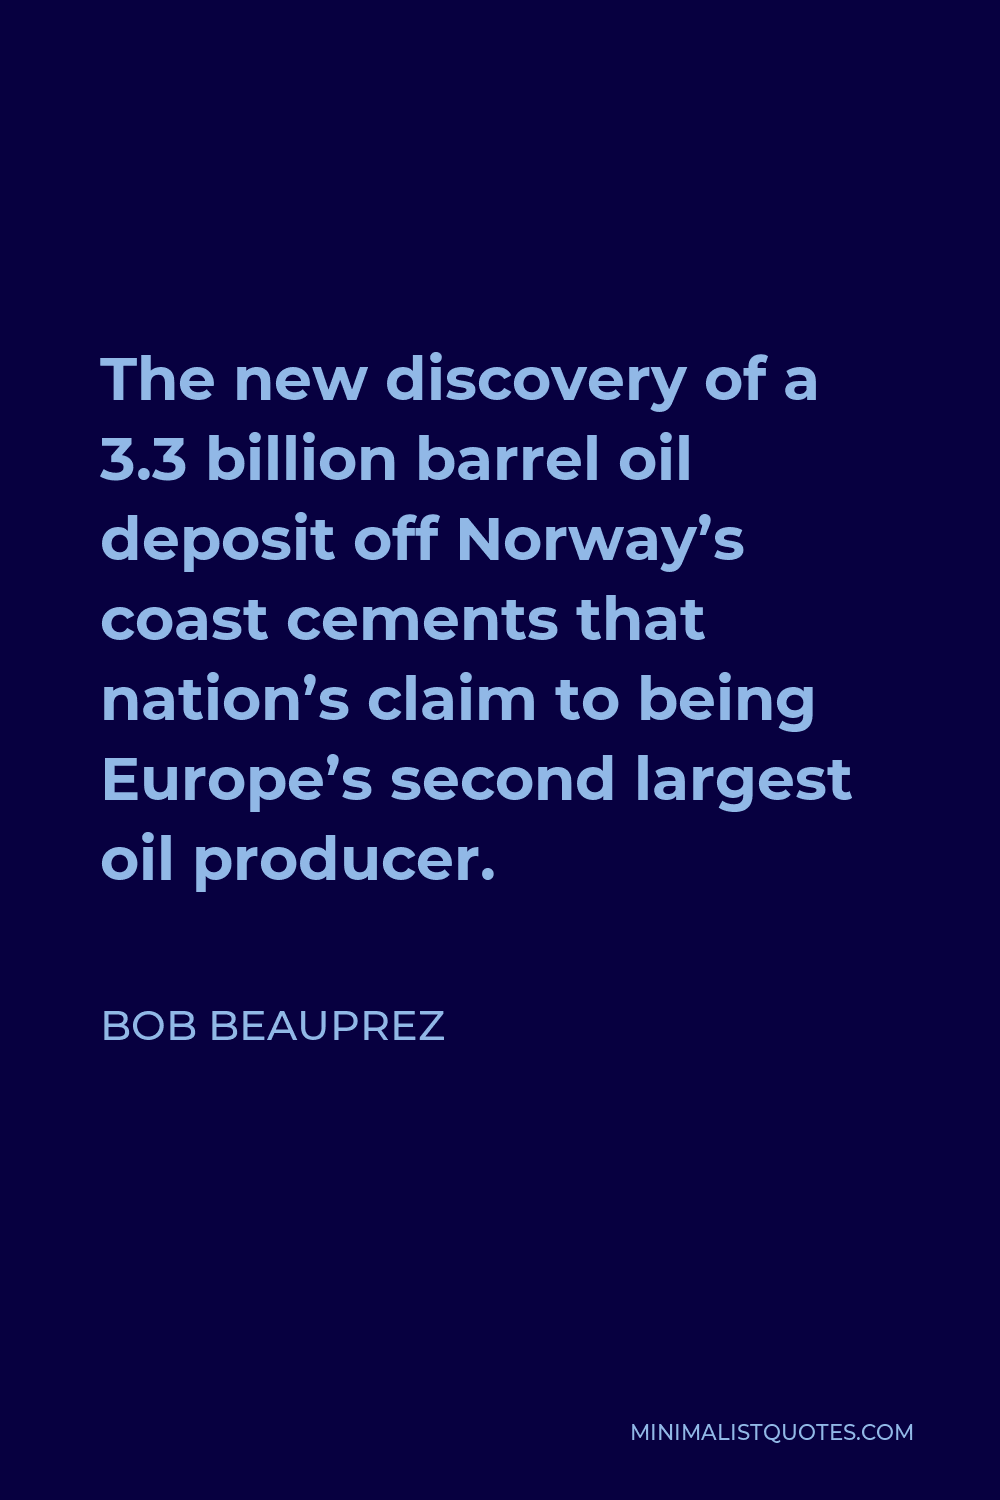 Bob Beauprez Quote - The new discovery of a 3.3 billion barrel oil deposit off Norway’s coast cements that nation’s claim to being Europe’s second largest oil producer.